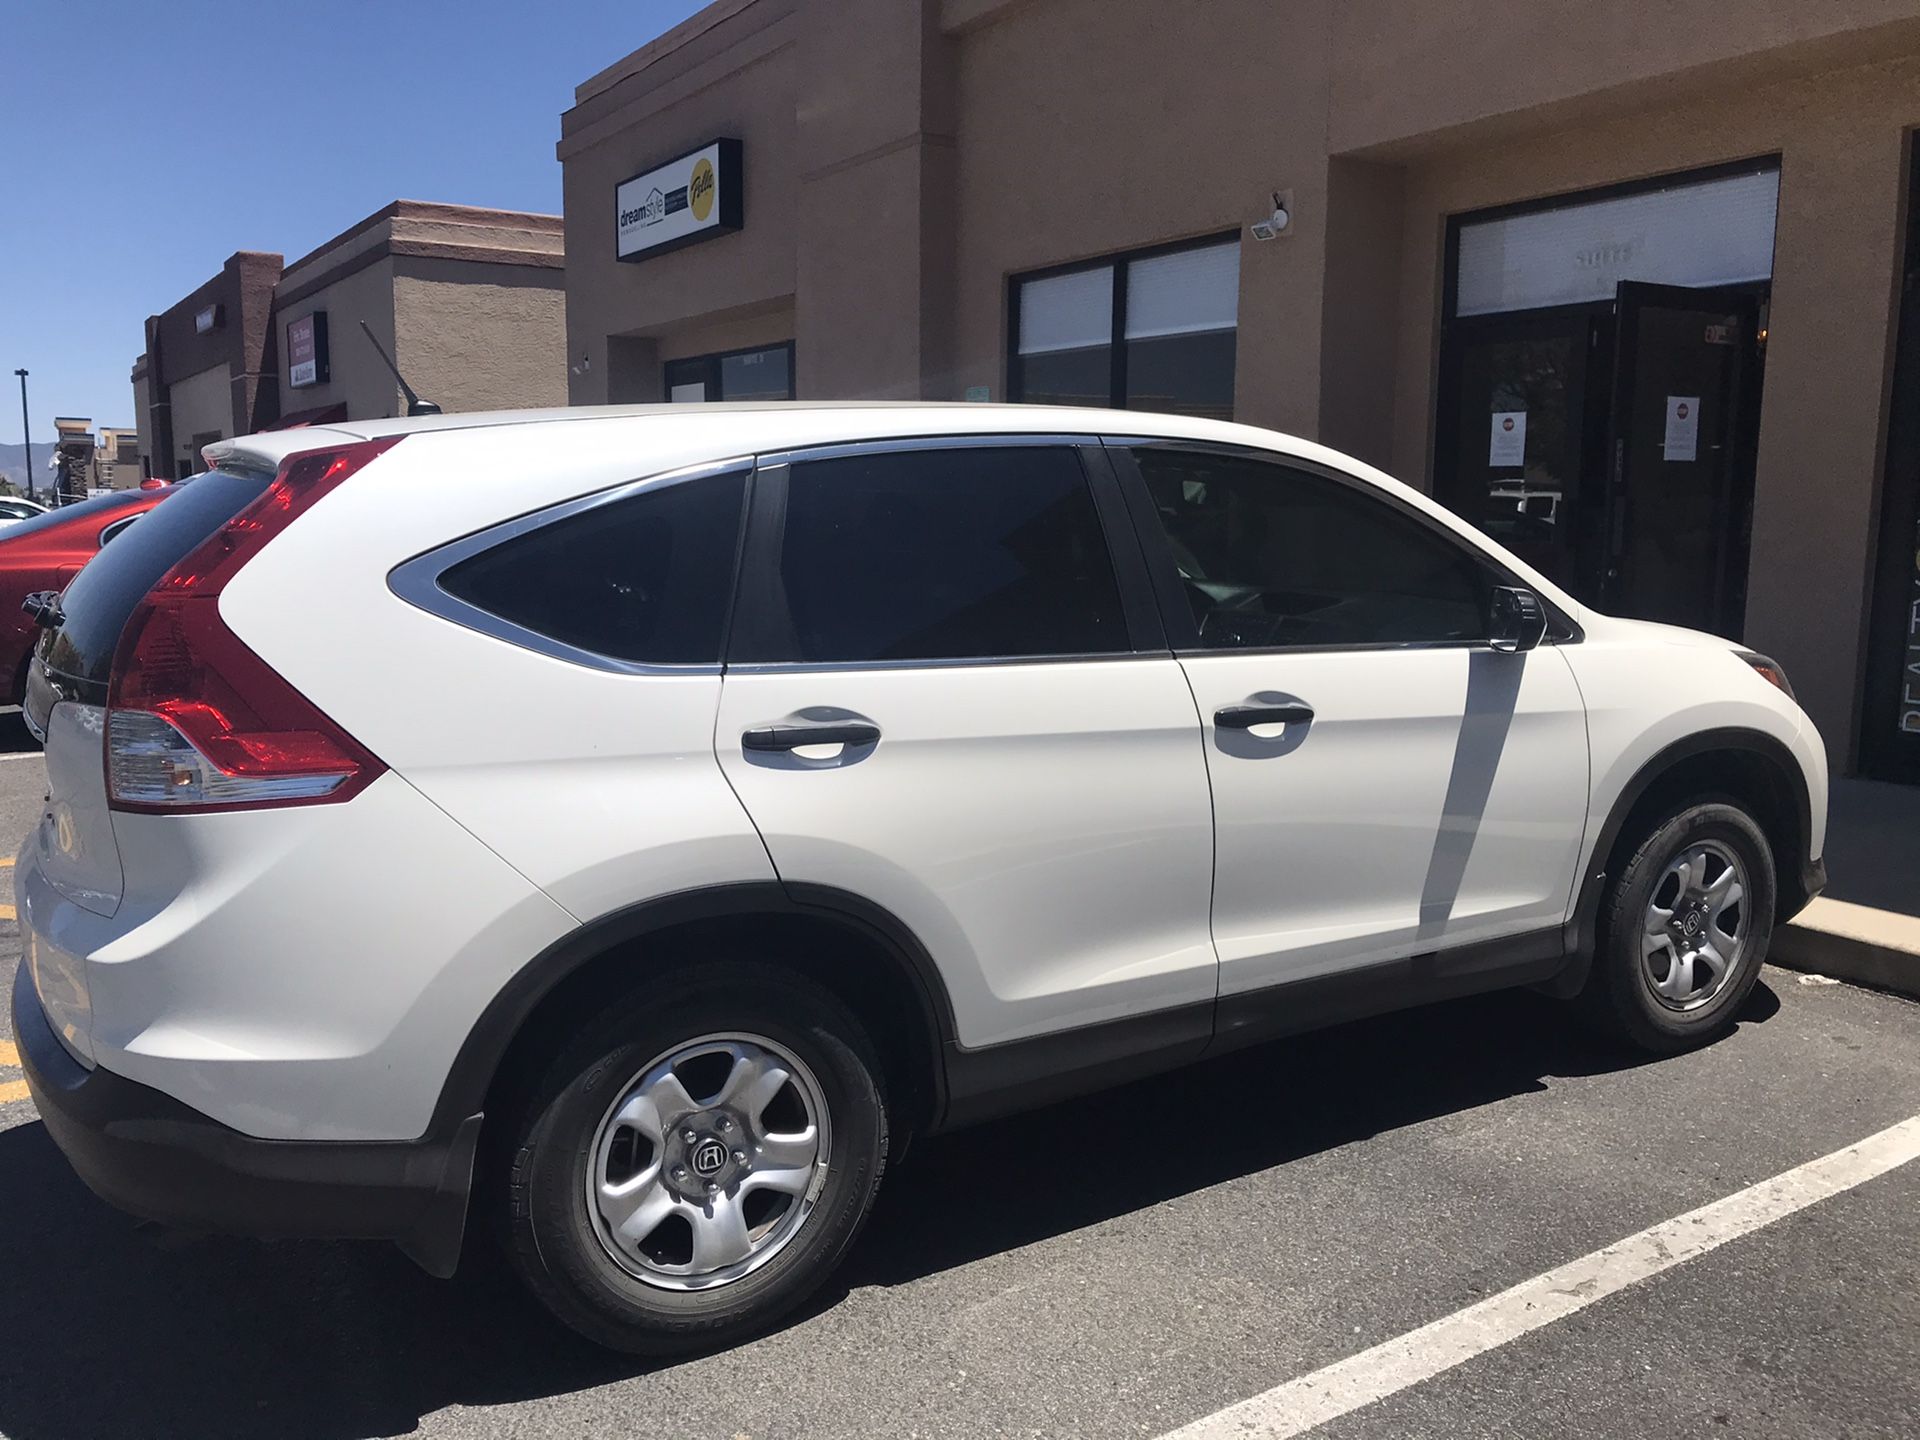 ‘13 Honda CRV, 80,600 miles, original owner, diligently maintained, low miles.